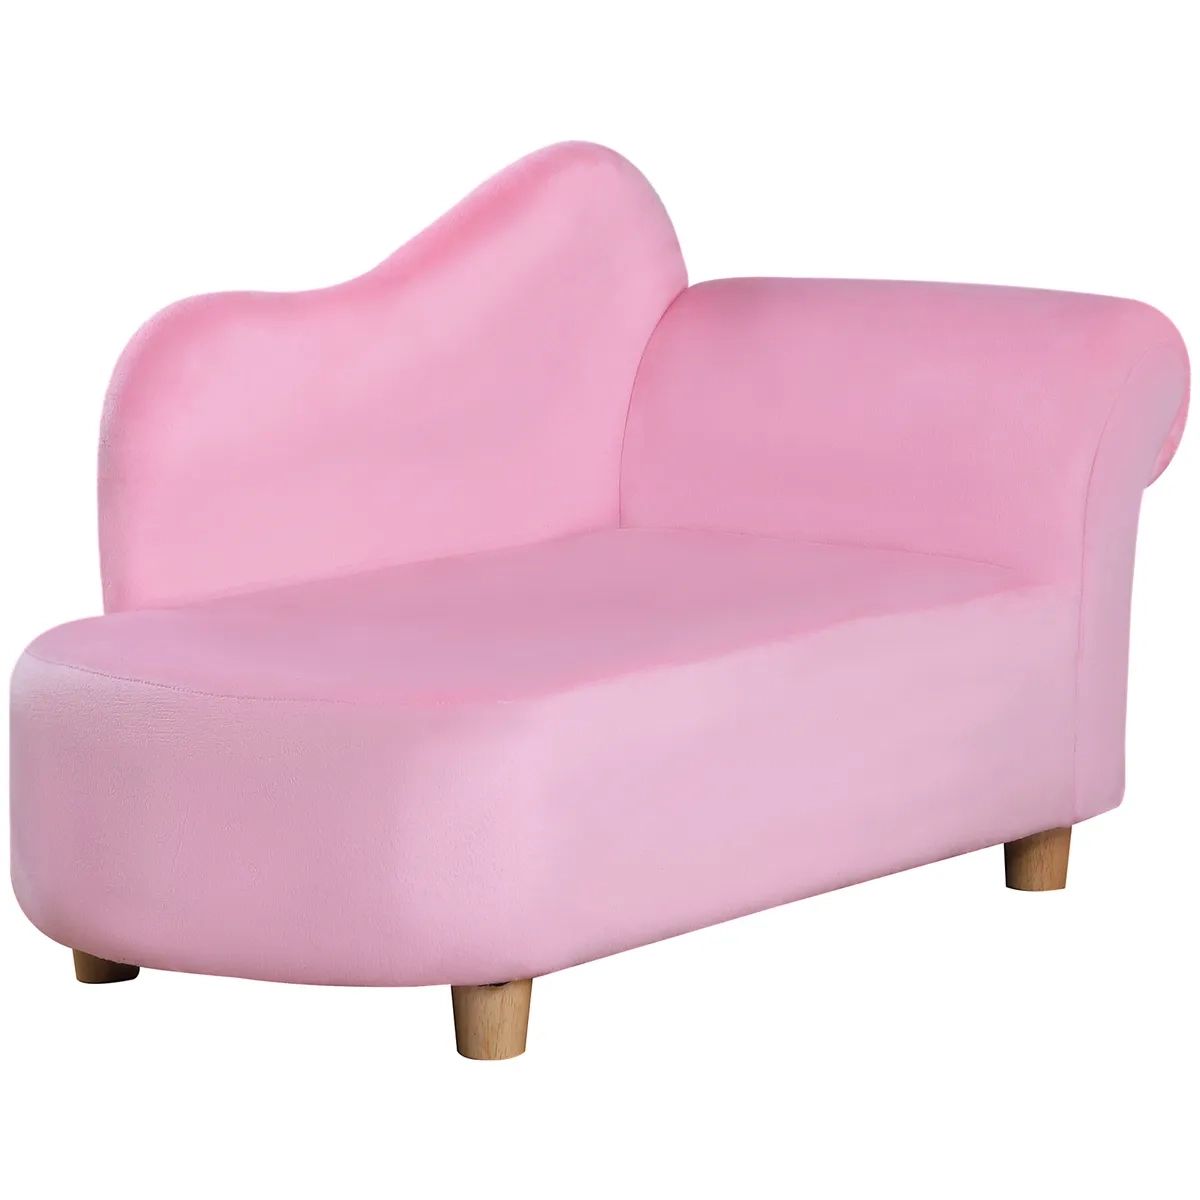 Homcom Kids Sofa Toddler Armchair Lounger Children Sofa Bed Bedroom Chair  Pink | Ebay Within Children'S Sofa Beds (Photo 8 of 15)